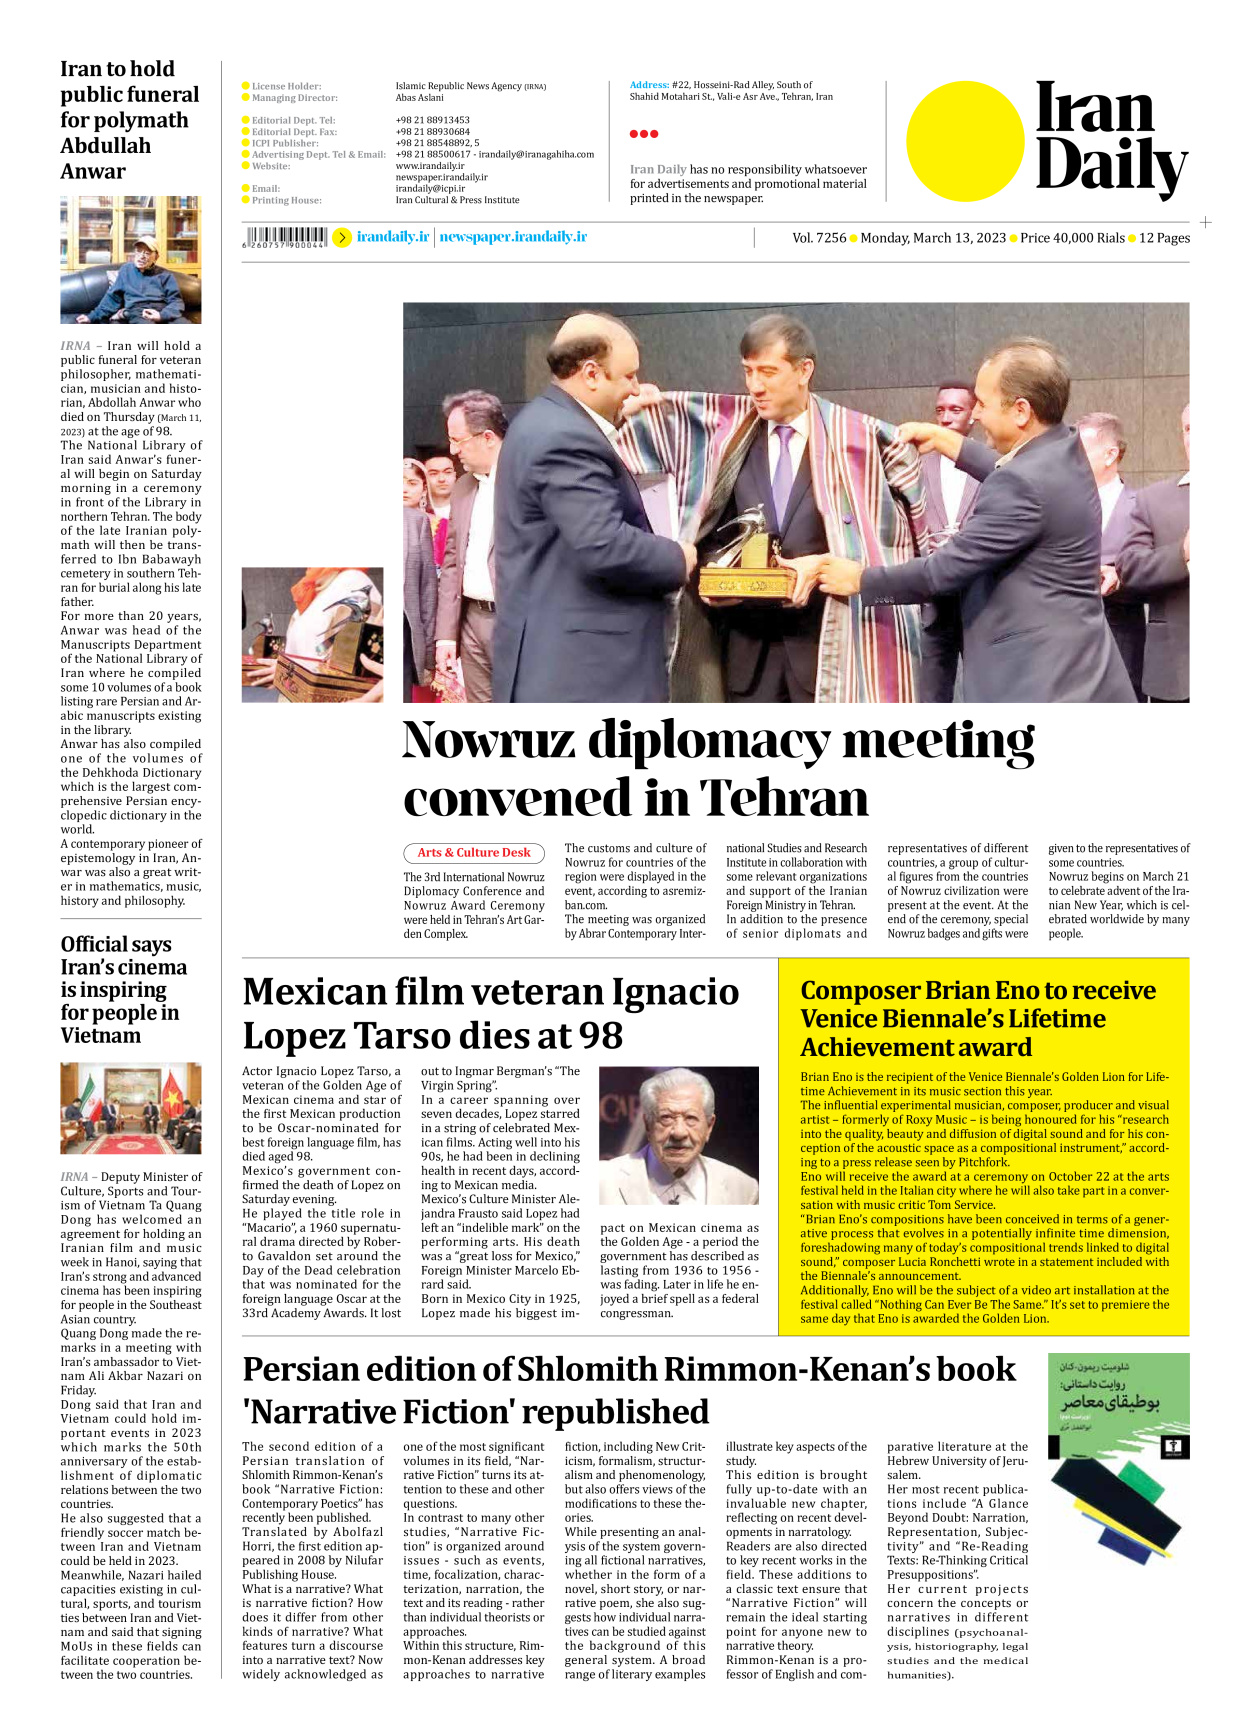 Iran Daily - Number Seven Thousand Two Hundred and Fifty Six - 13 March 2023 - Page 12